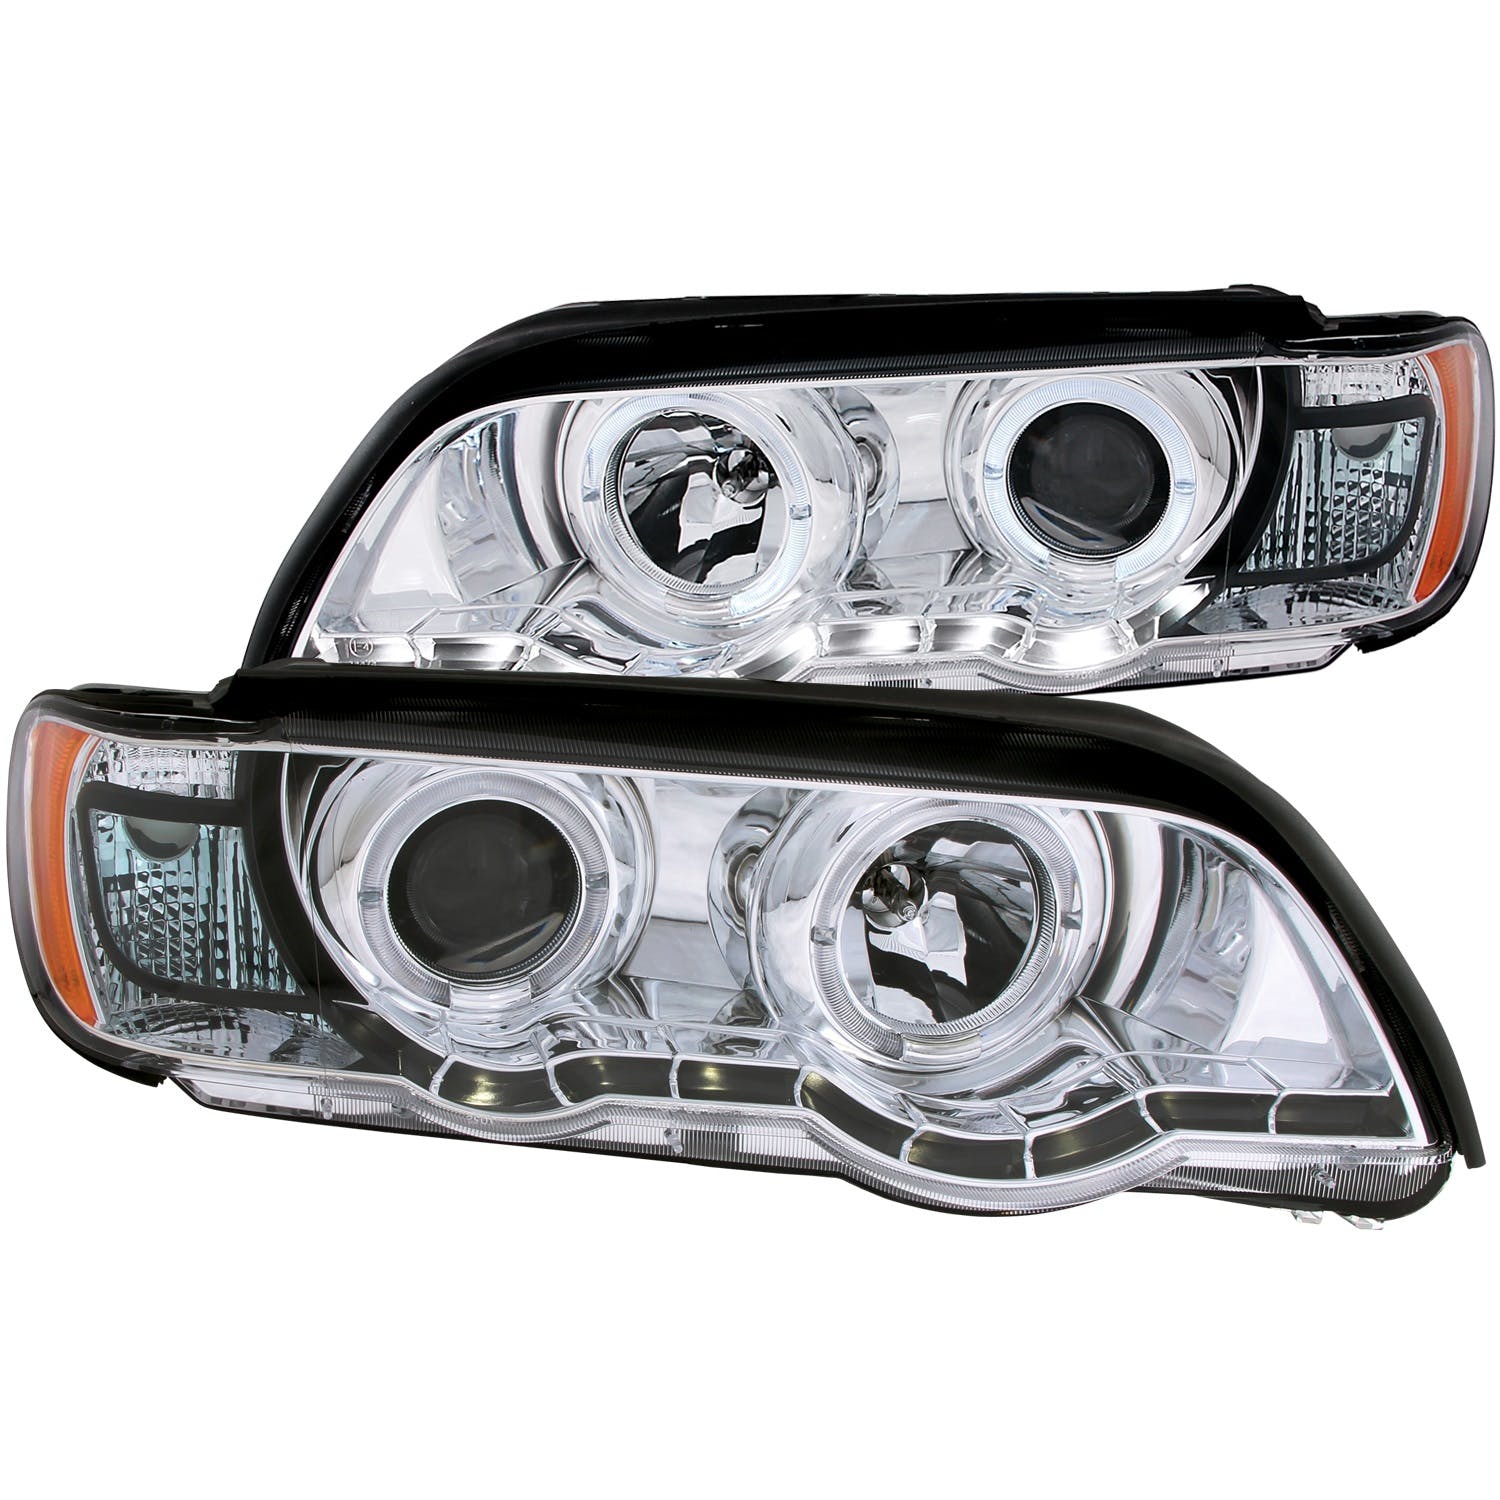 AnzoUSA 121397 Projector Headlights with Halo Chrome